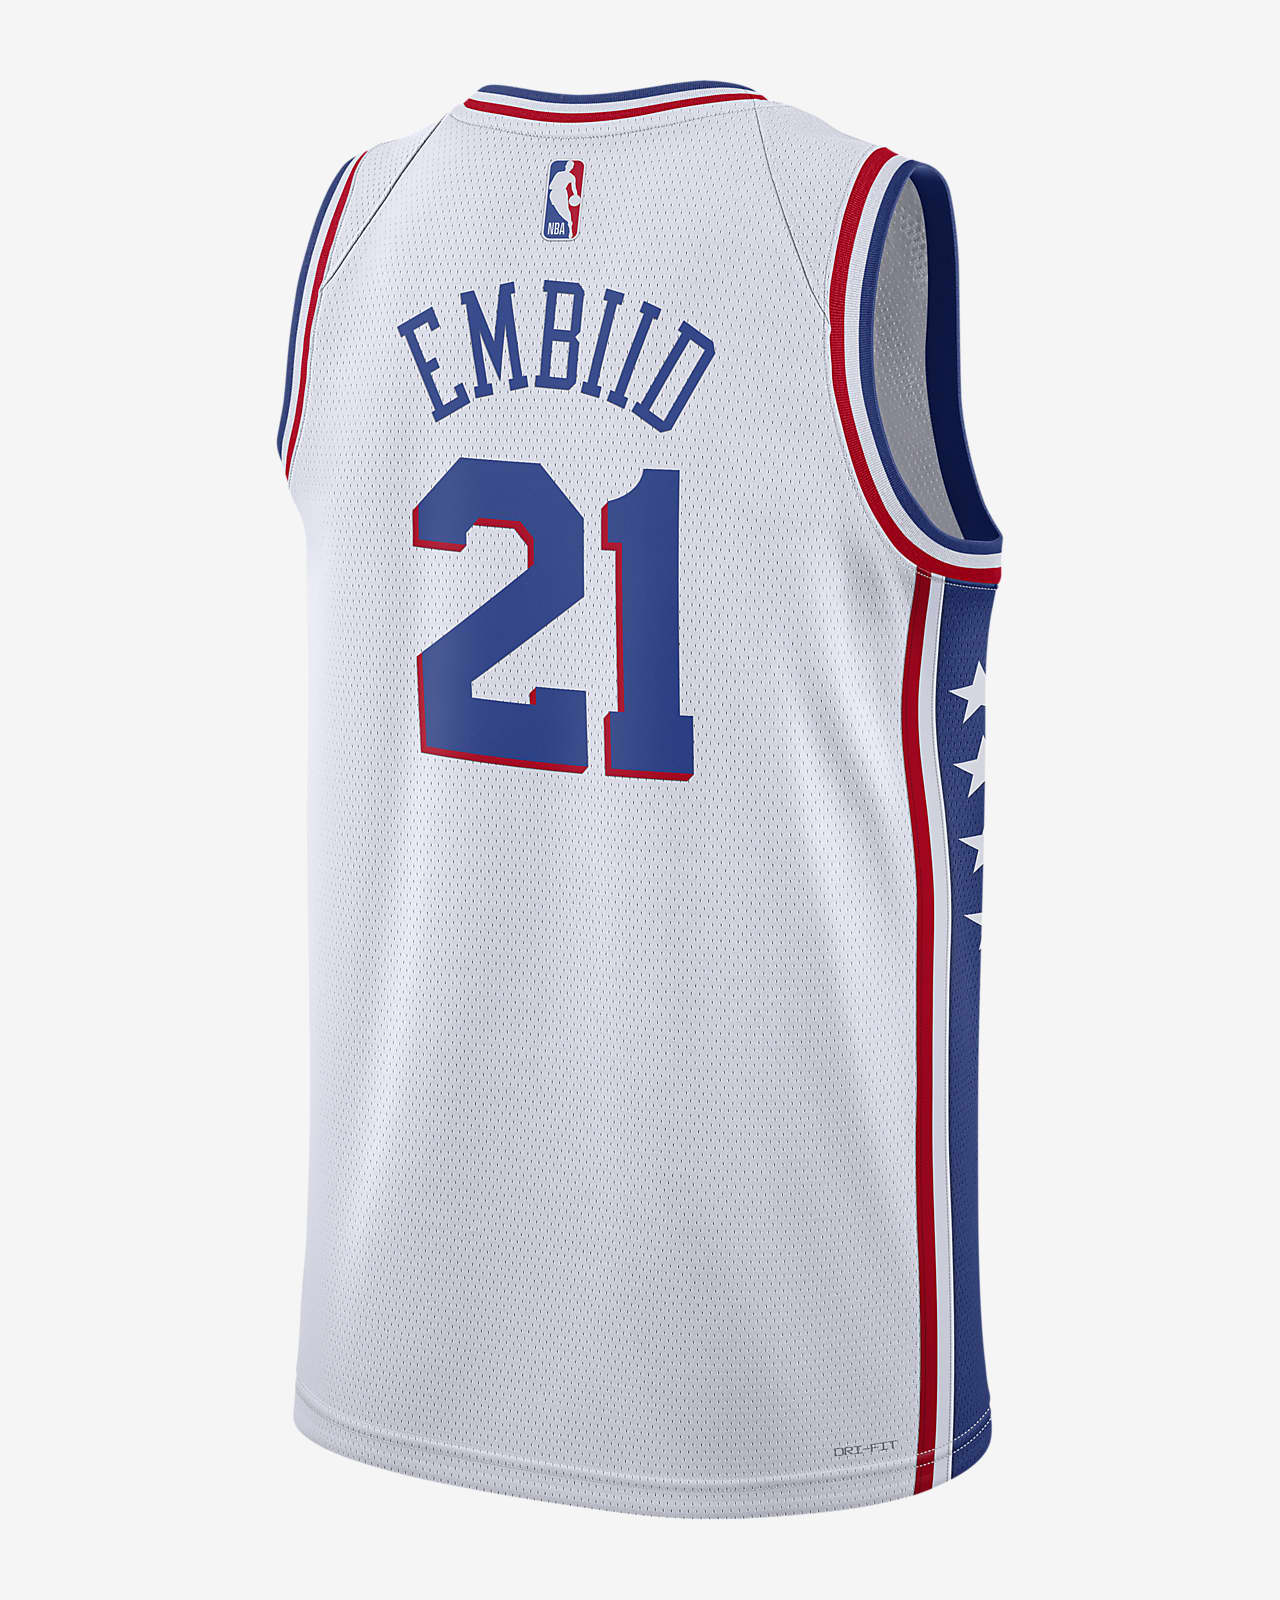 every 76ers jersey ever